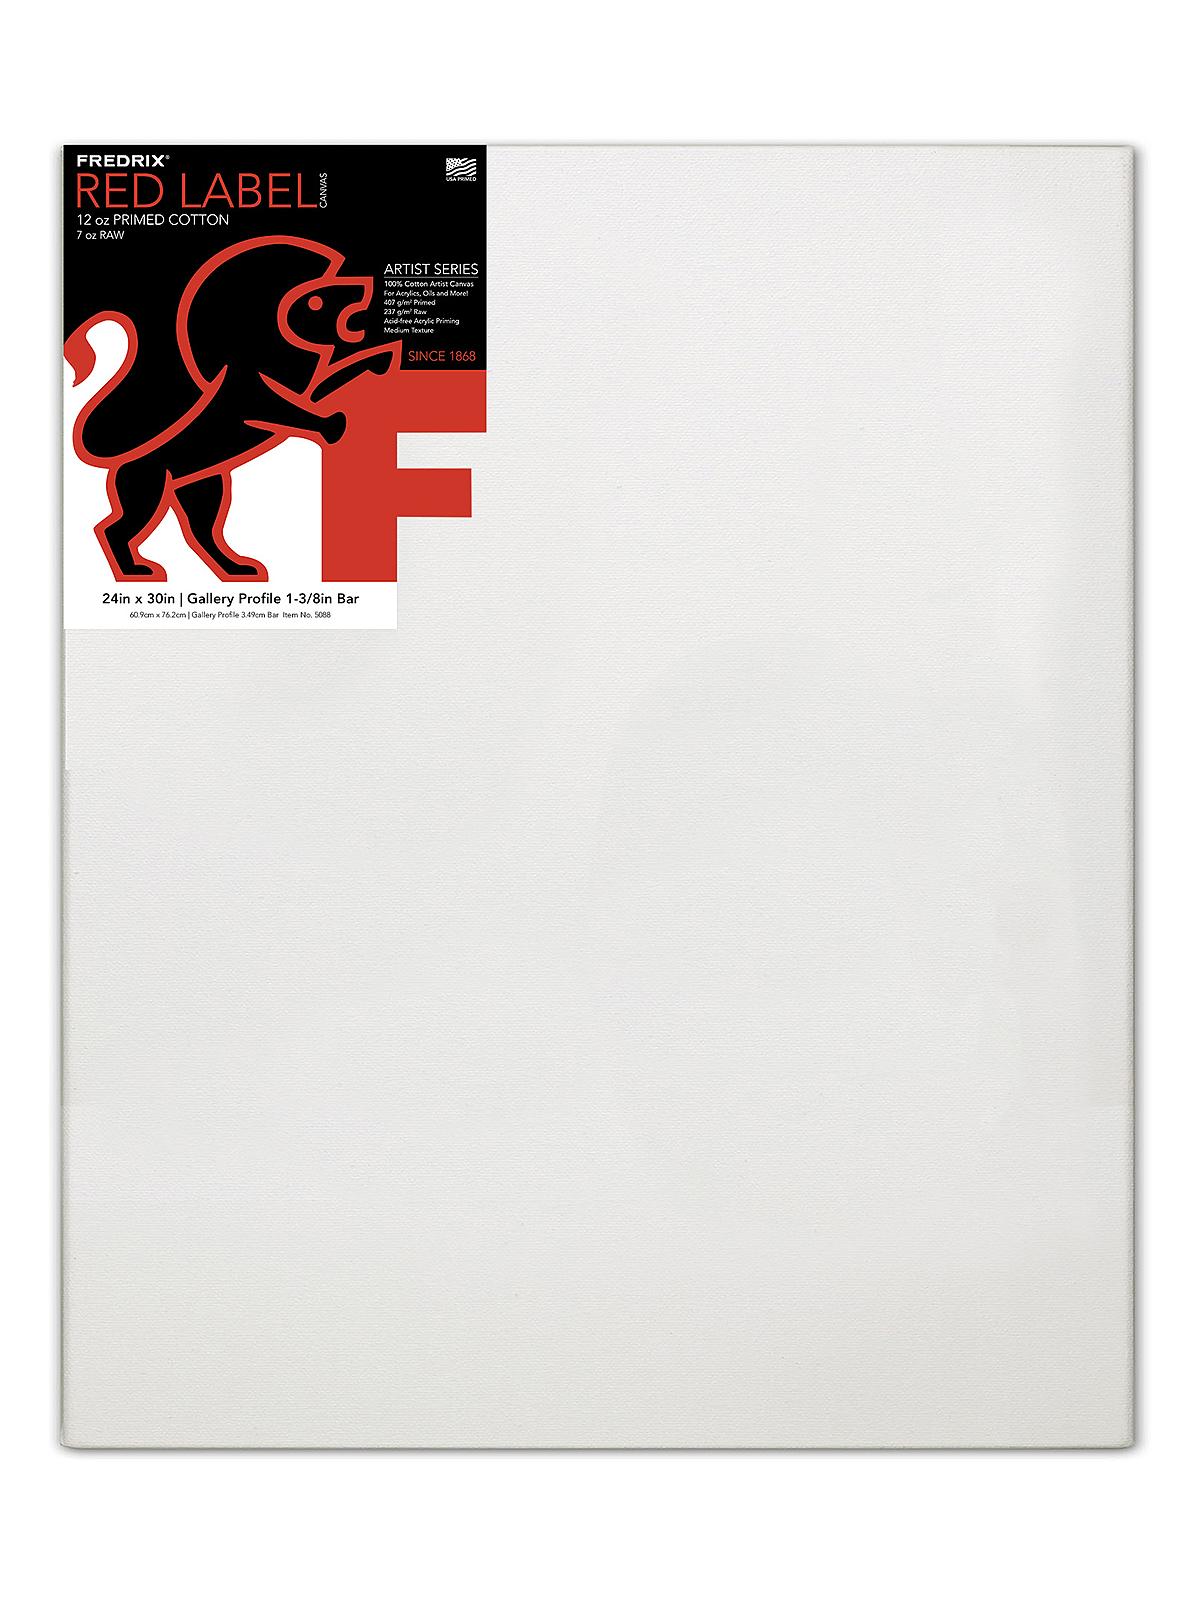 Red Label Gallerywrap Stretched Canvas 24 In. X 30 In. Each